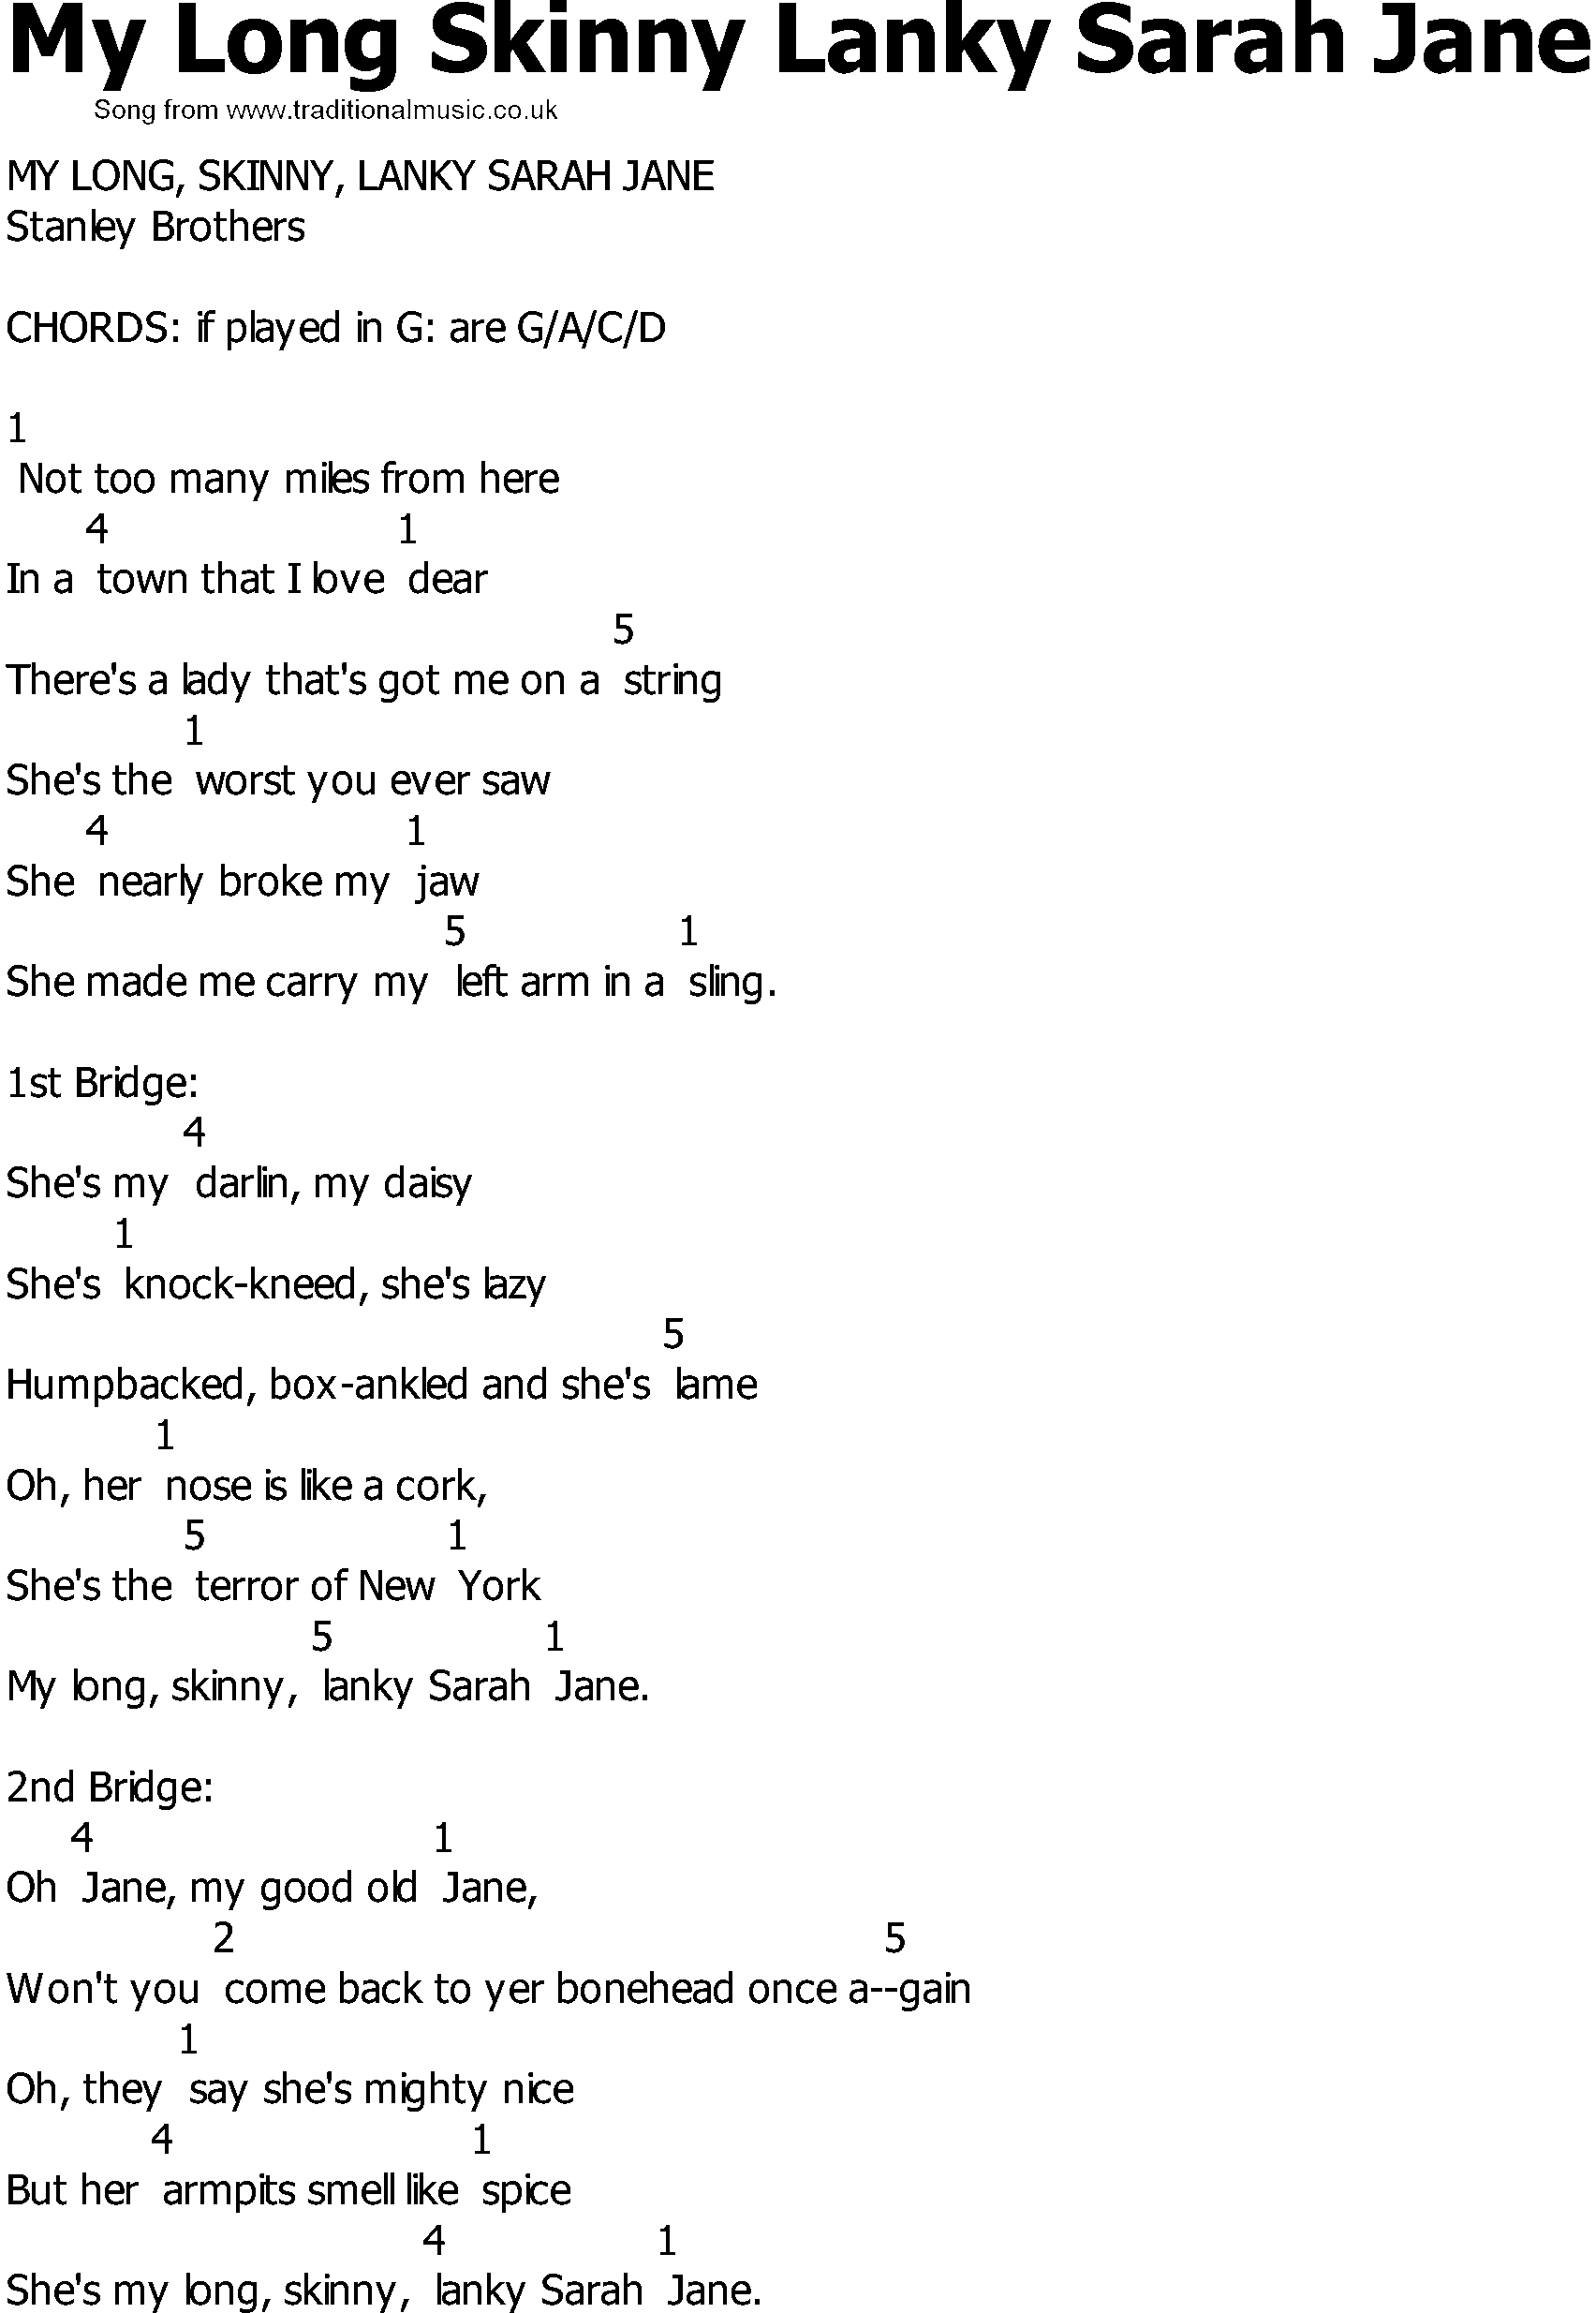 Skinny Love Chords Old Country Song Lyrics With Chords My Long Skinny Lanky Sarah Jane